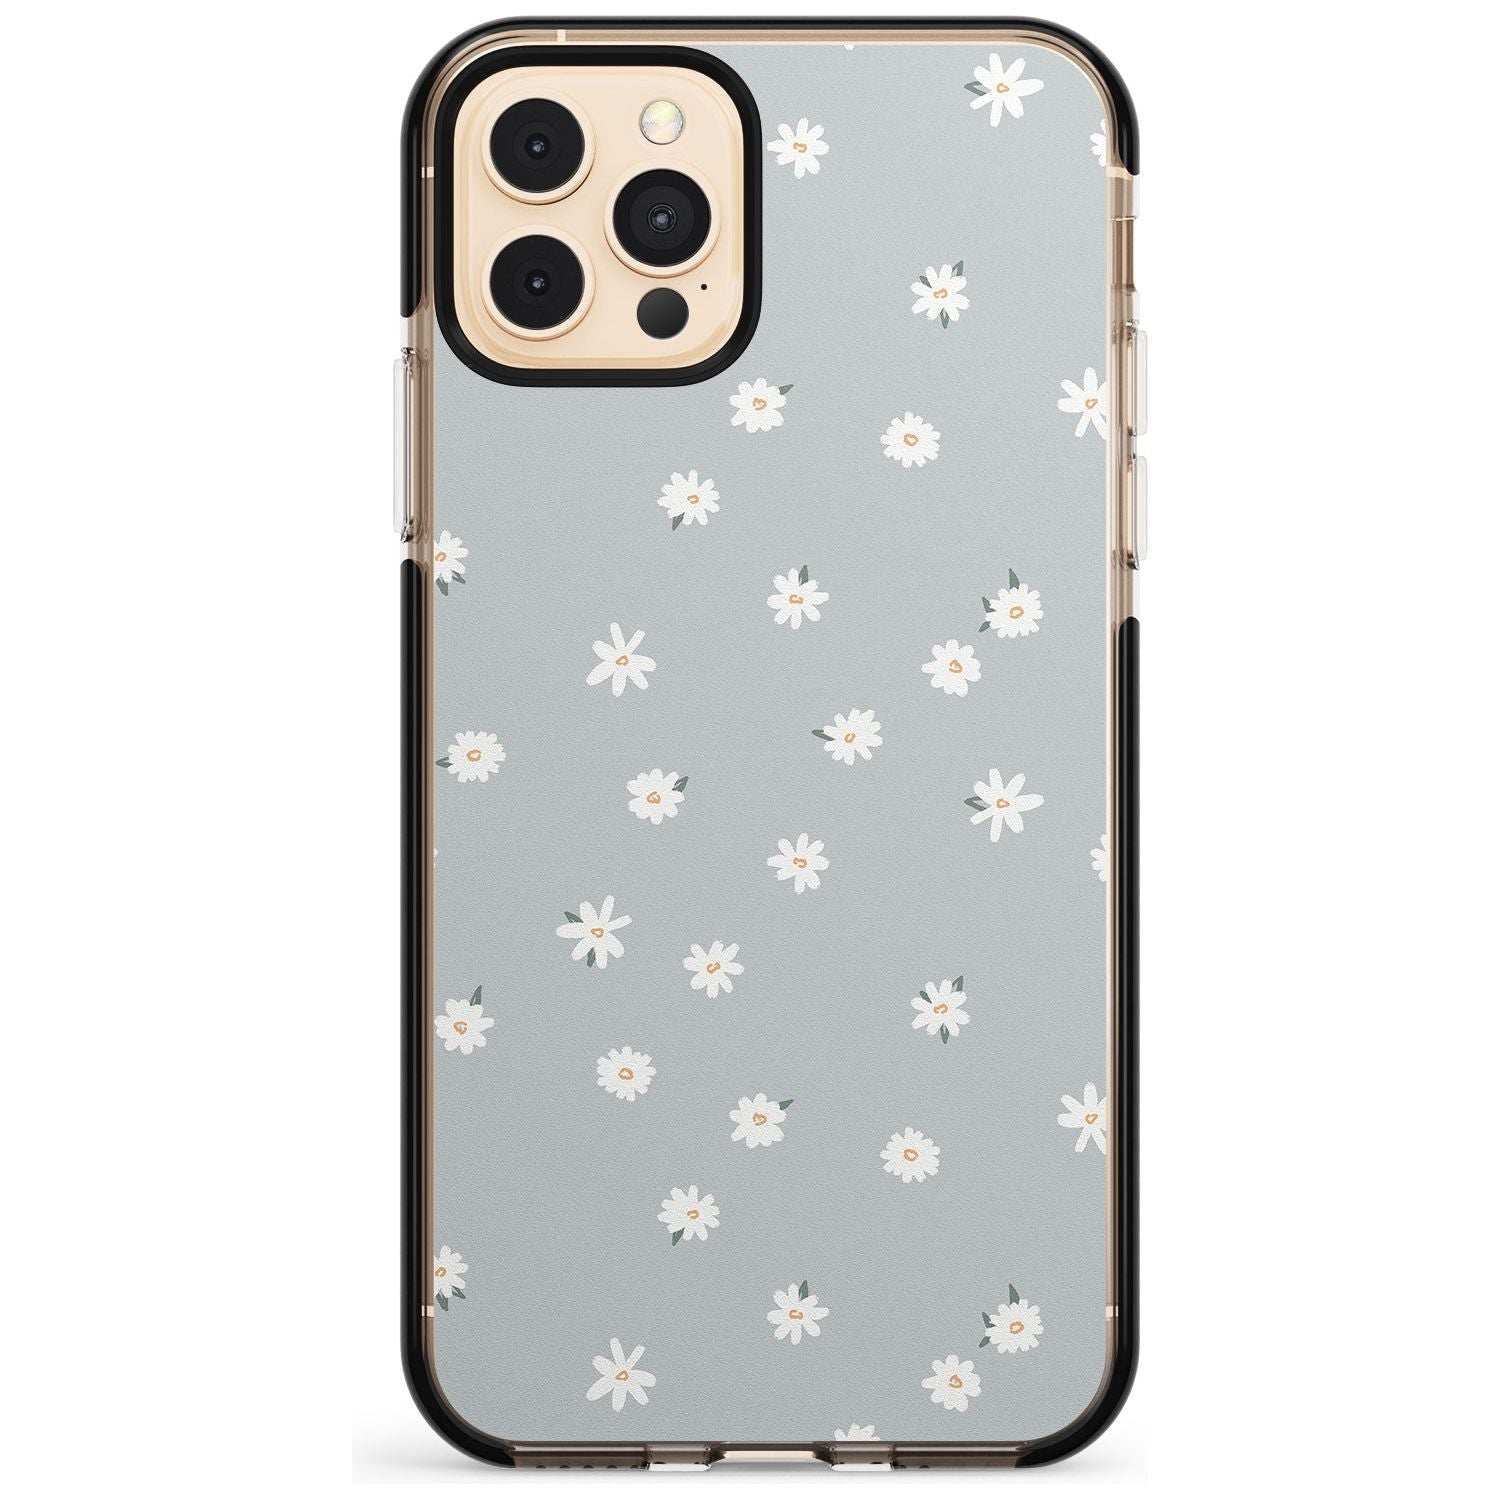 Painted Daises - Blue-Grey Cute Floral Design Pink Fade Impact Phone Case for iPhone 11